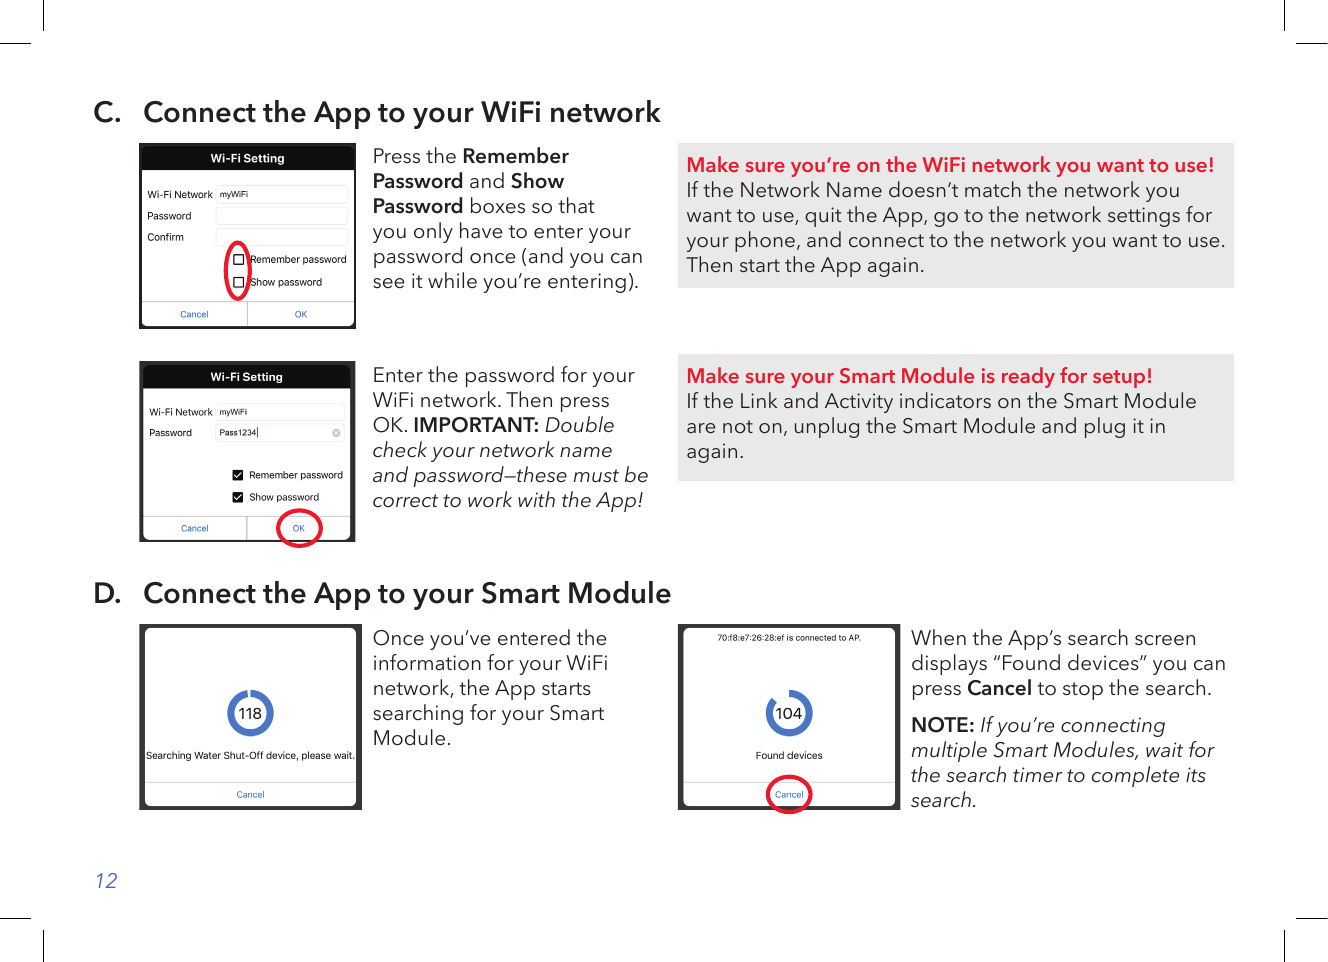 12Make sure your Smart Module is ready for setup!If the Link and Activity indicators on the Smart Module are not on, unplug the Smart Module and plug it in again.Make sure you’re on the WiFi network you want to use!If the Network Name doesn’t match the network you want to use, quit the App, go to the network settings for your phone, and connect to the network you want to use. Then start the App again.C.   Connect the App to your WiFi networkPress the Remember Password and Show Password boxes so that you only have to enter your password once (and you can see it while you’re entering).Enter the password for your WiFi network. Then press OK. IMPORTANT: Double check your network name and password—these must be correct to work with the App!D.   Connect the App to your Smart ModuleOnce you’ve entered the information for your WiFi network, the App starts searching for your Smart Module. When the App’s search screen displays “Found devices” you can press Cancel to stop the search. NOTE: If you’re connecting multiple Smart Modules, wait for the search timer to complete its search.